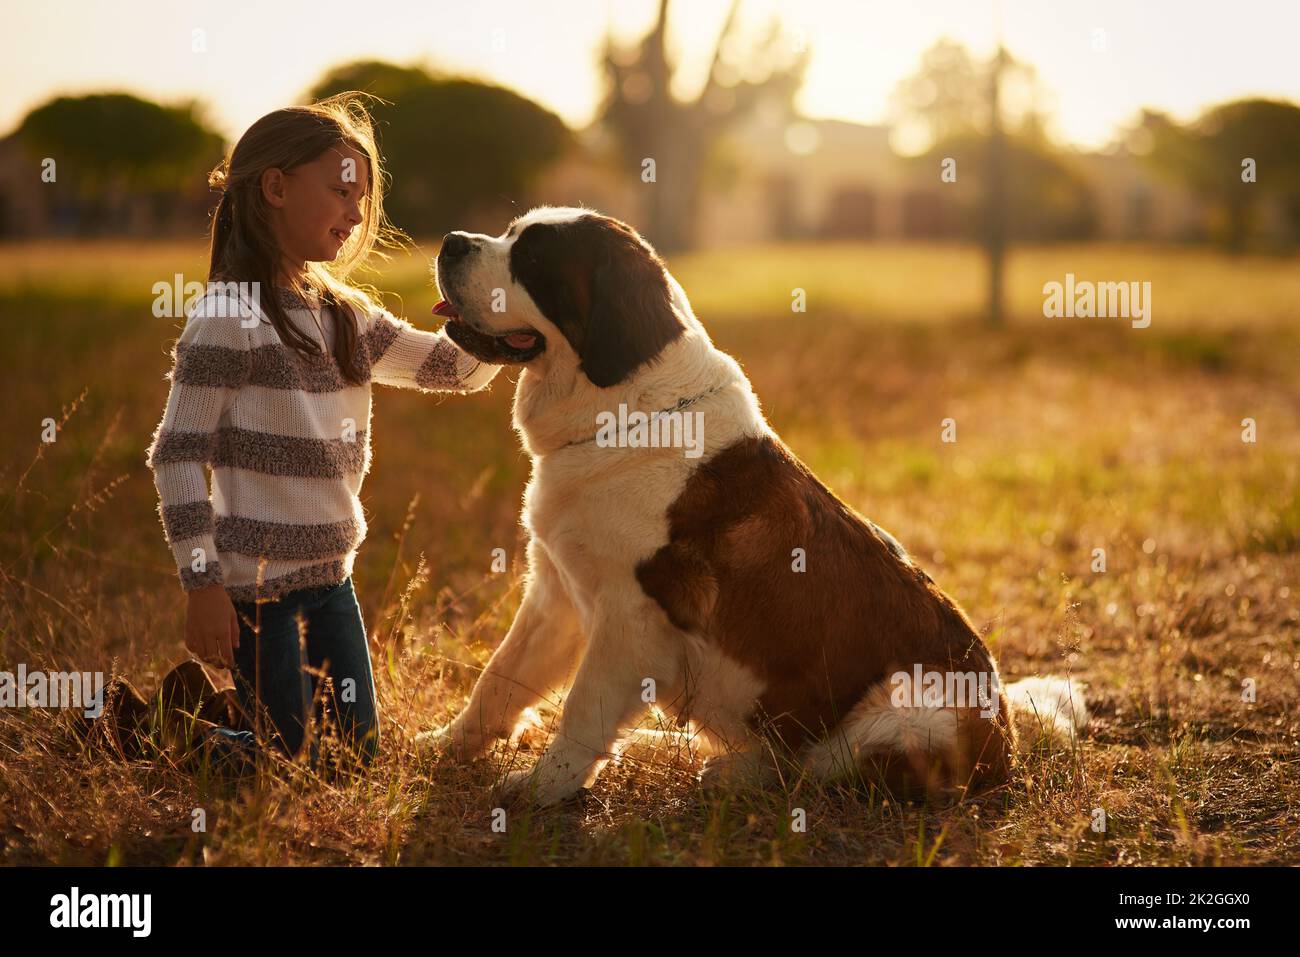 Whos a good boy. Shot of a cute little girl teaching her dog a trick while they play outside. Stock Photo